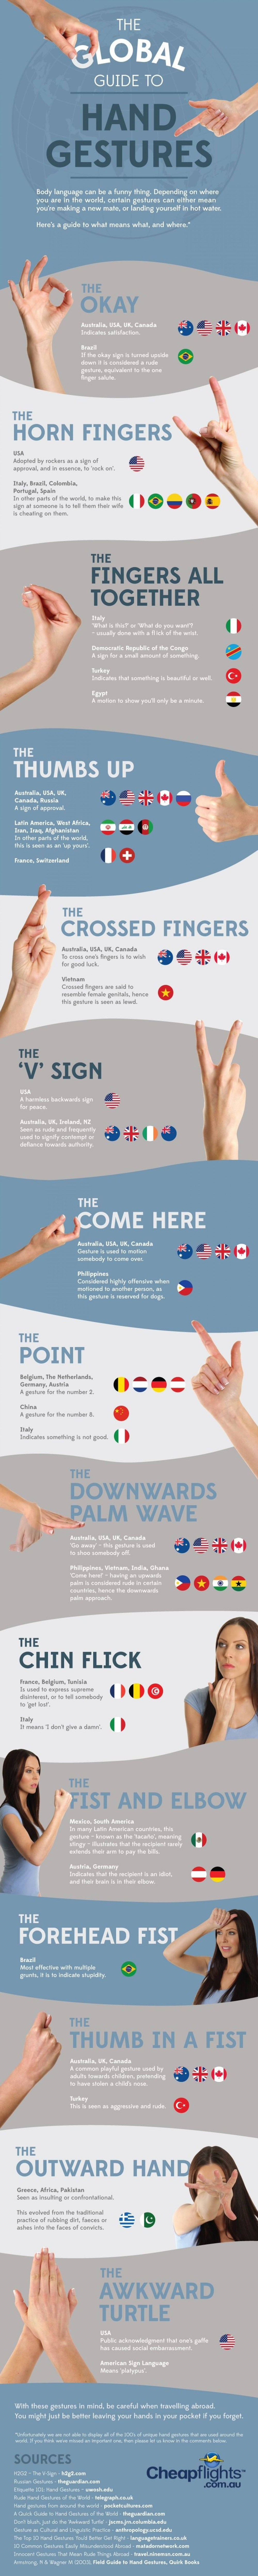 infographic-the-global-guide-to-hand-gestures_53287cf4db5ea_w1500